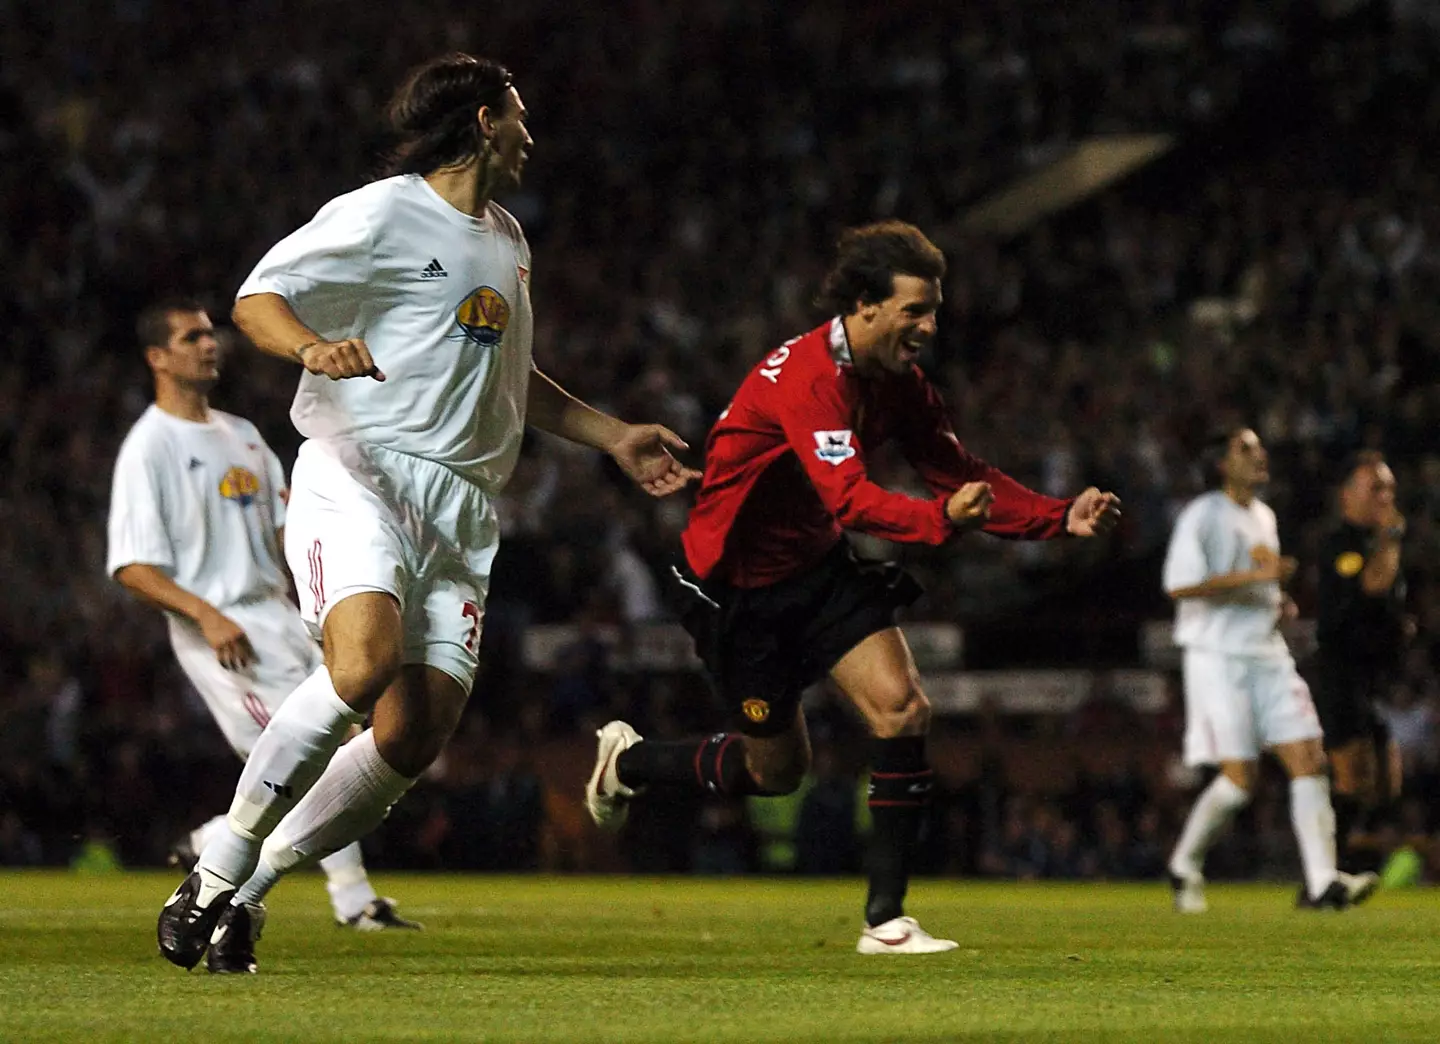 Ronaldo will hope to beat two Van Nistelrooy records. Image: PA Images